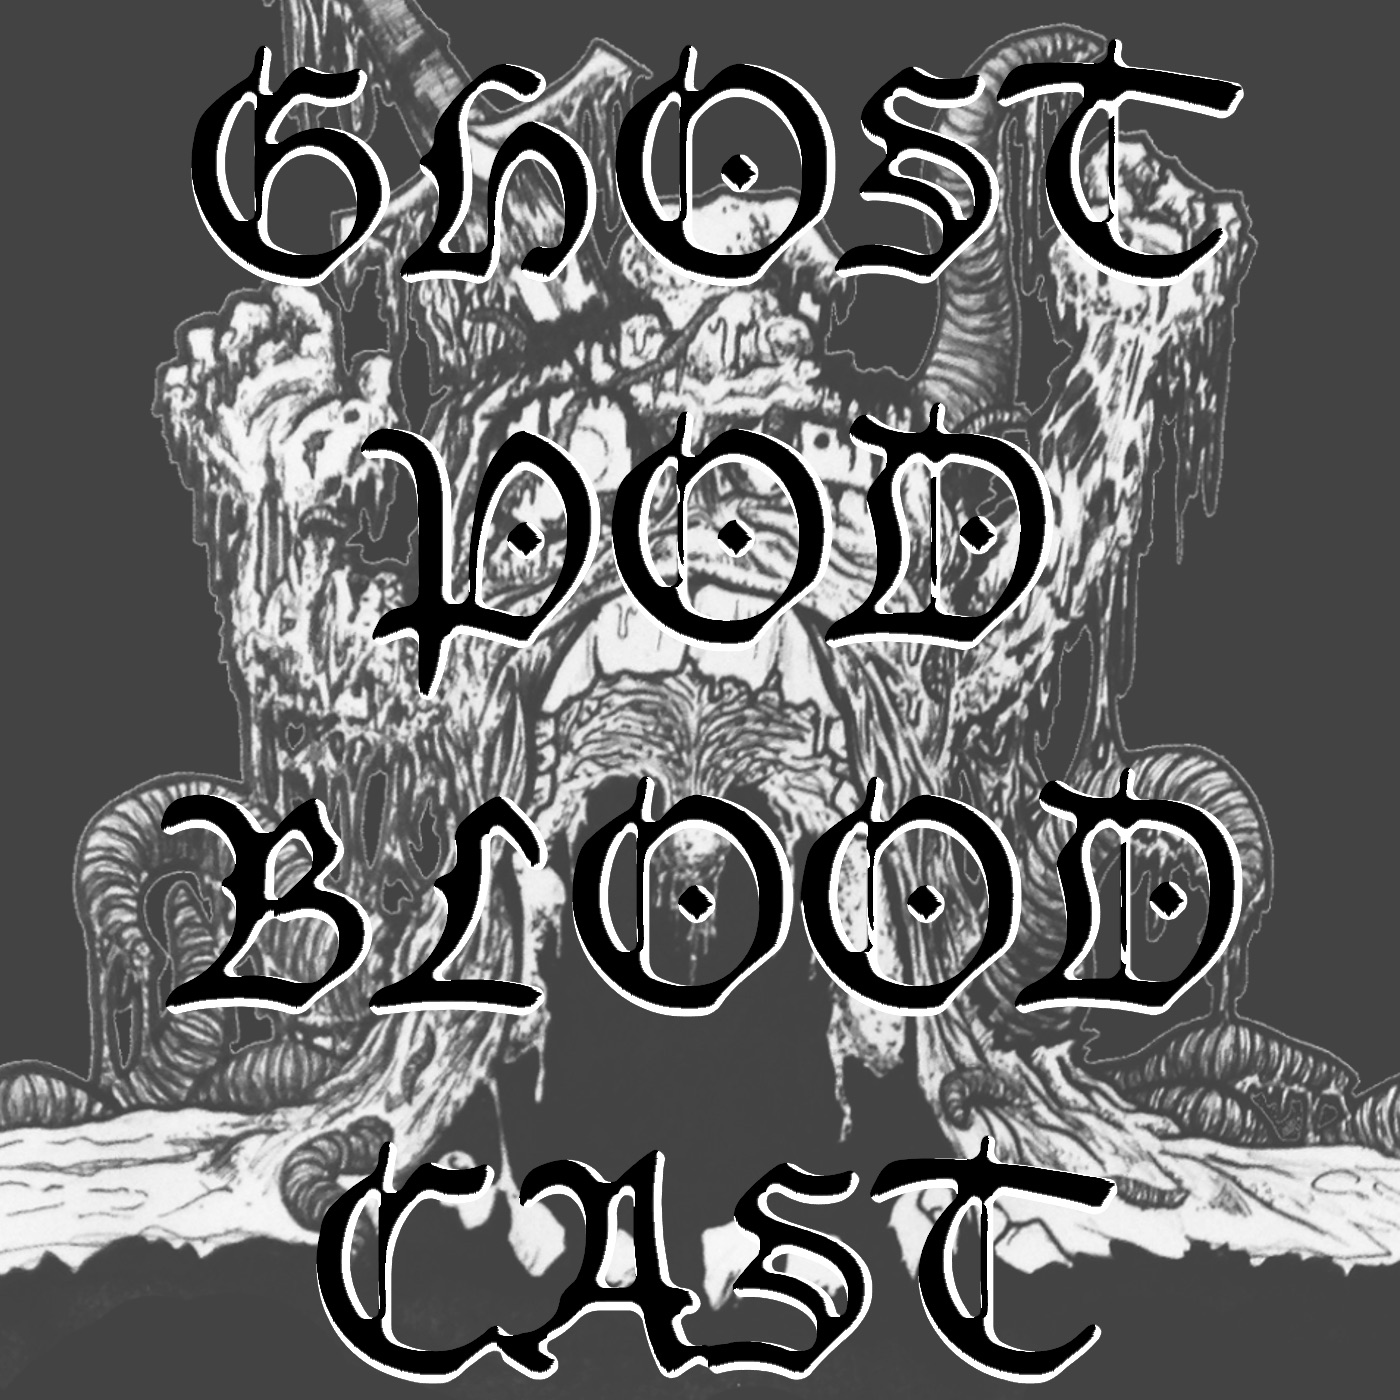 Ghostblood podcast division.